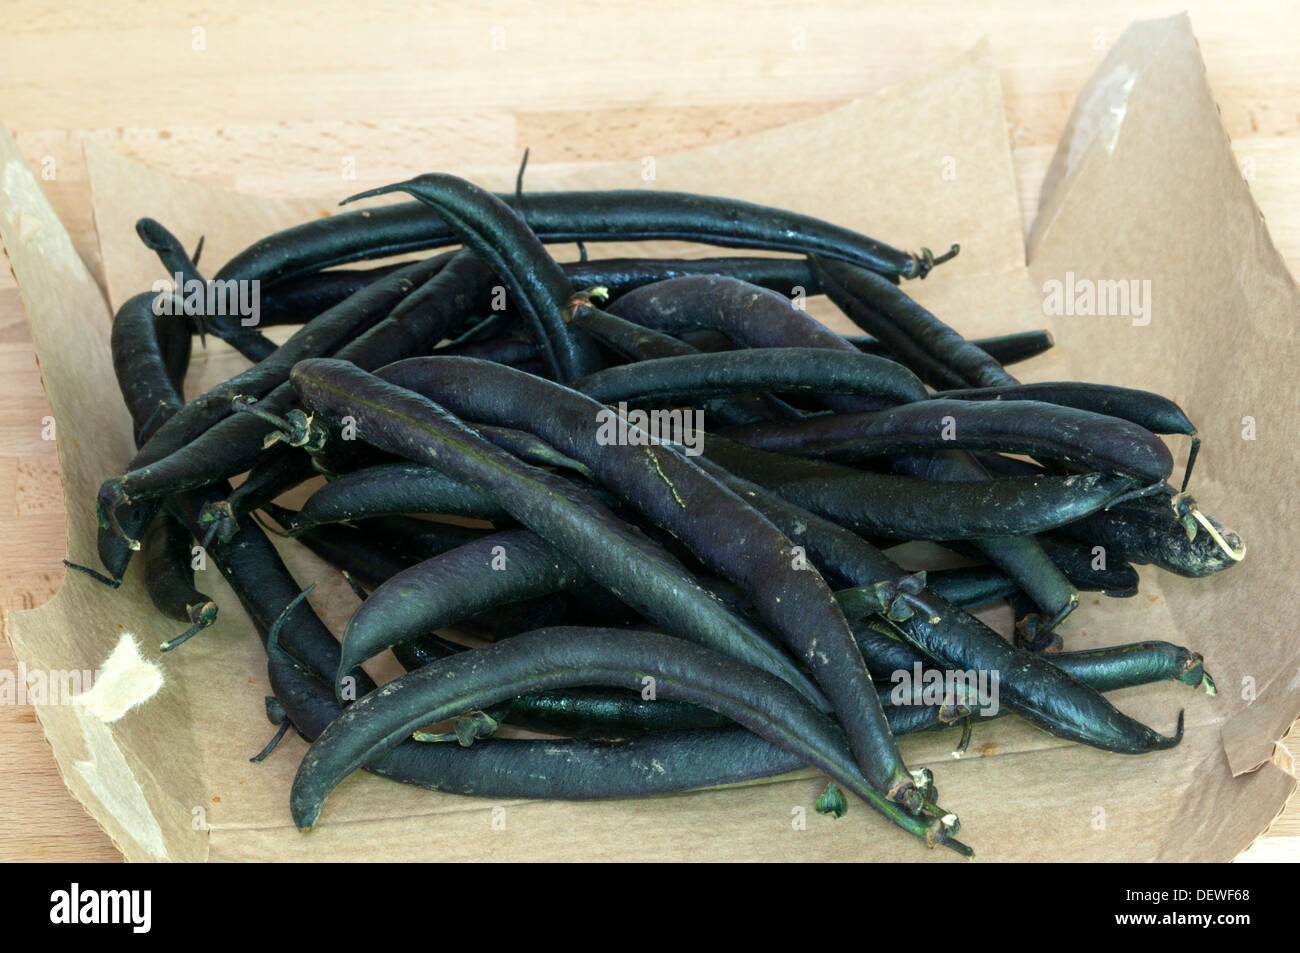 A pile of organic purple French beans. Stock Photo